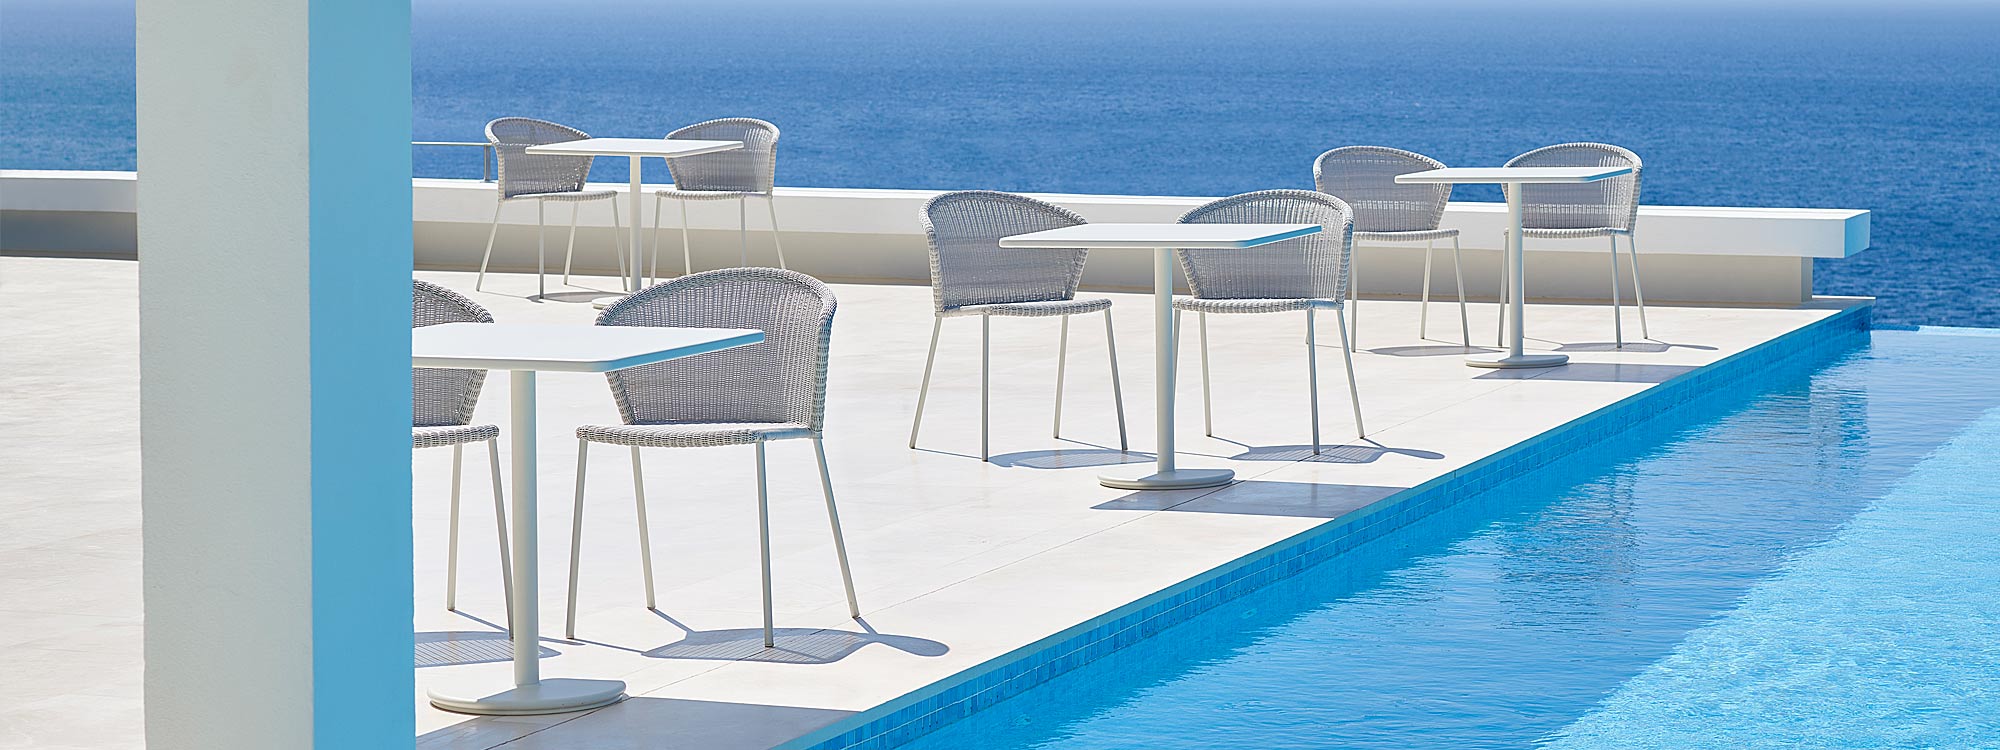 Image of white-grey Cane-line Lean chairs and white Go bistro tables on sunny poolside with sea in background